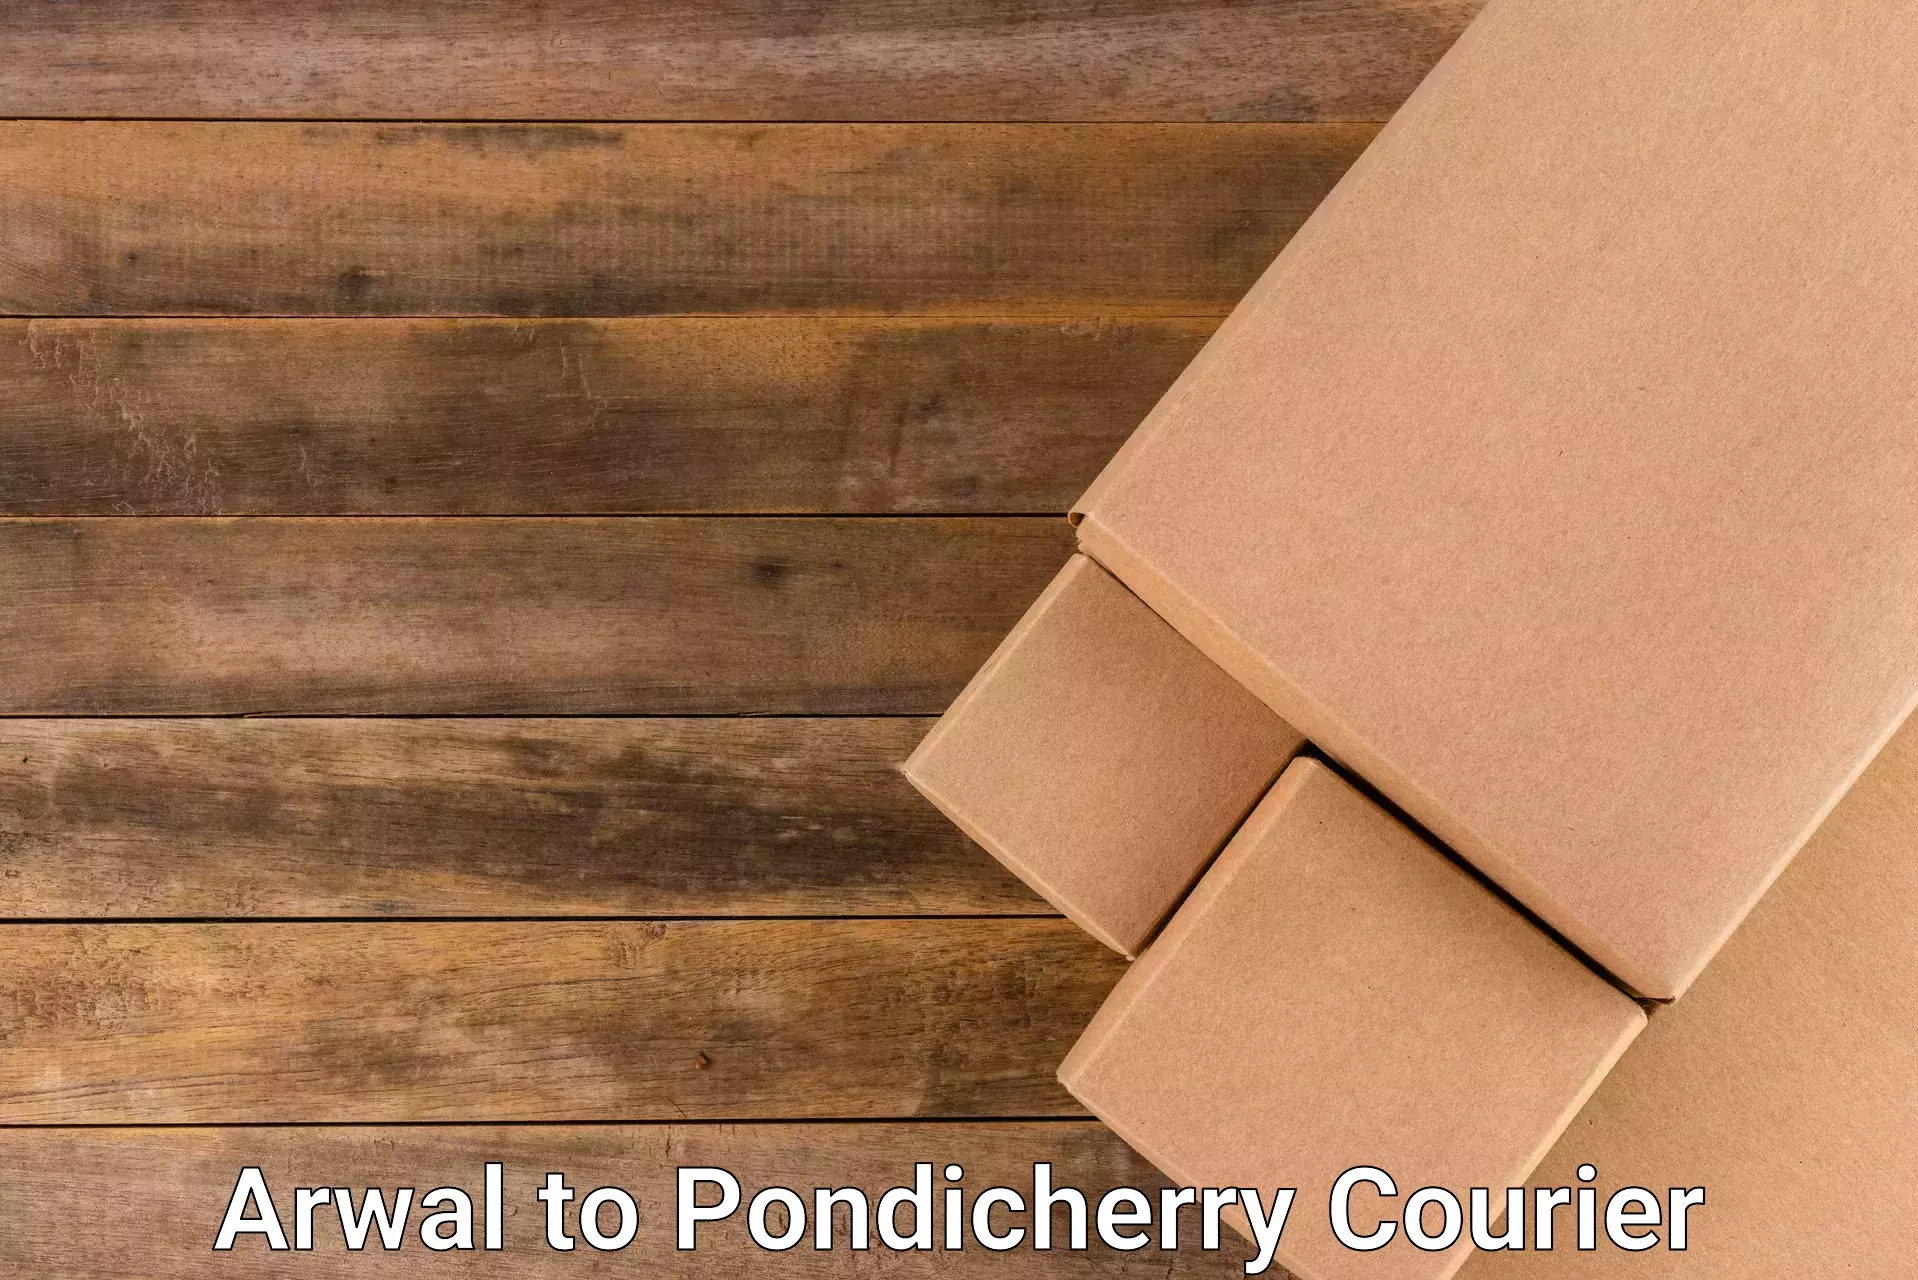 Overnight delivery services Arwal to Pondicherry